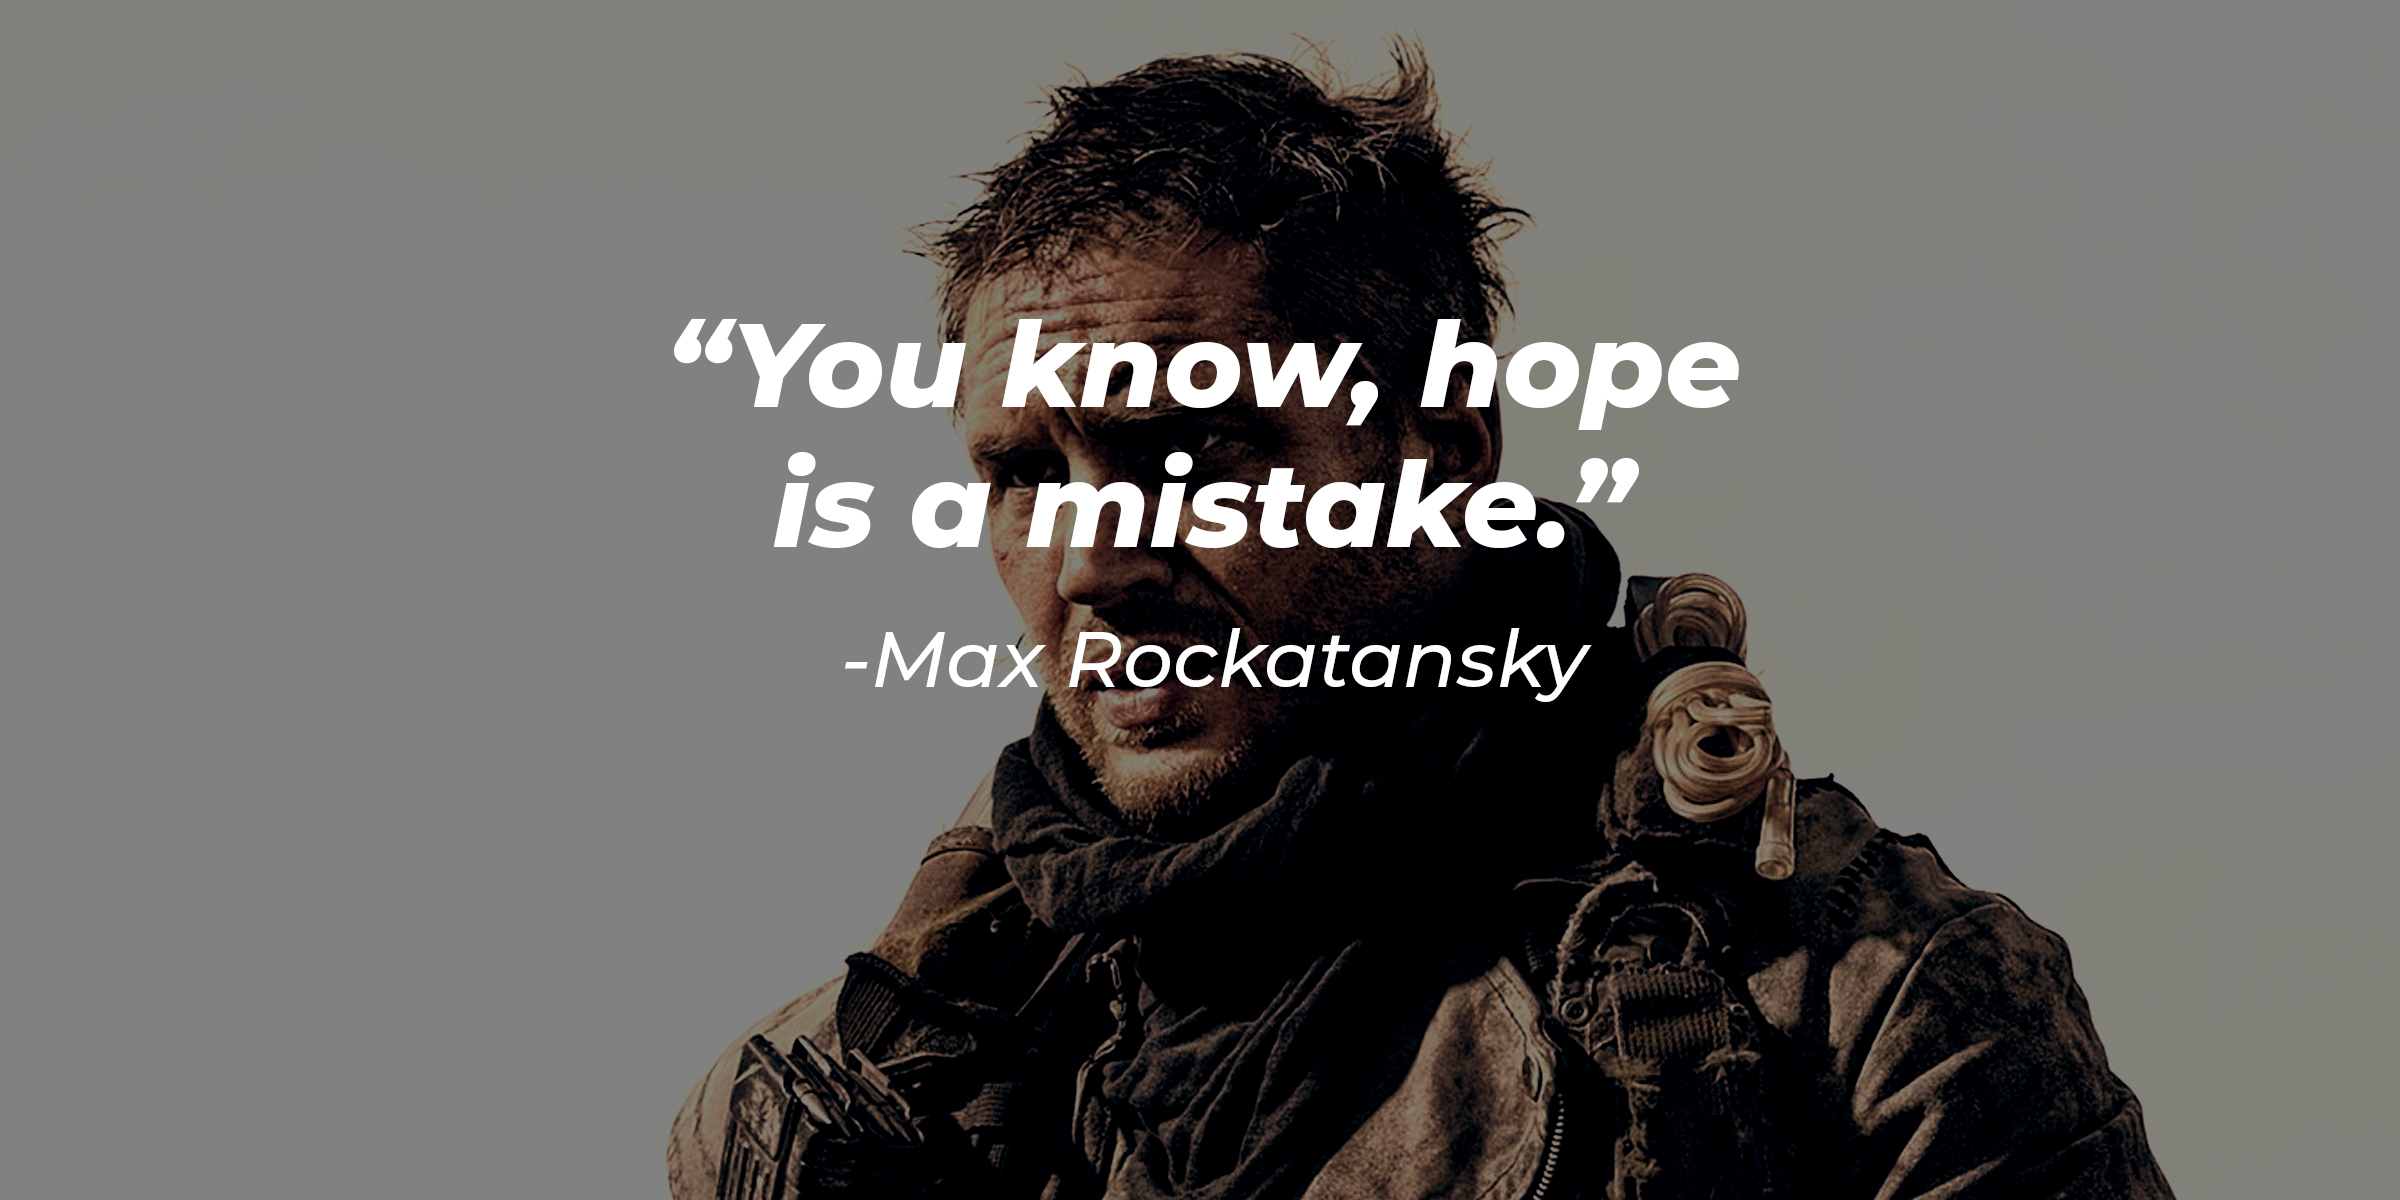 An image of Max Rockatansky, with his quote: "You know, hope is a mistake.” | Source: Facebook.com/MadMaxMovie